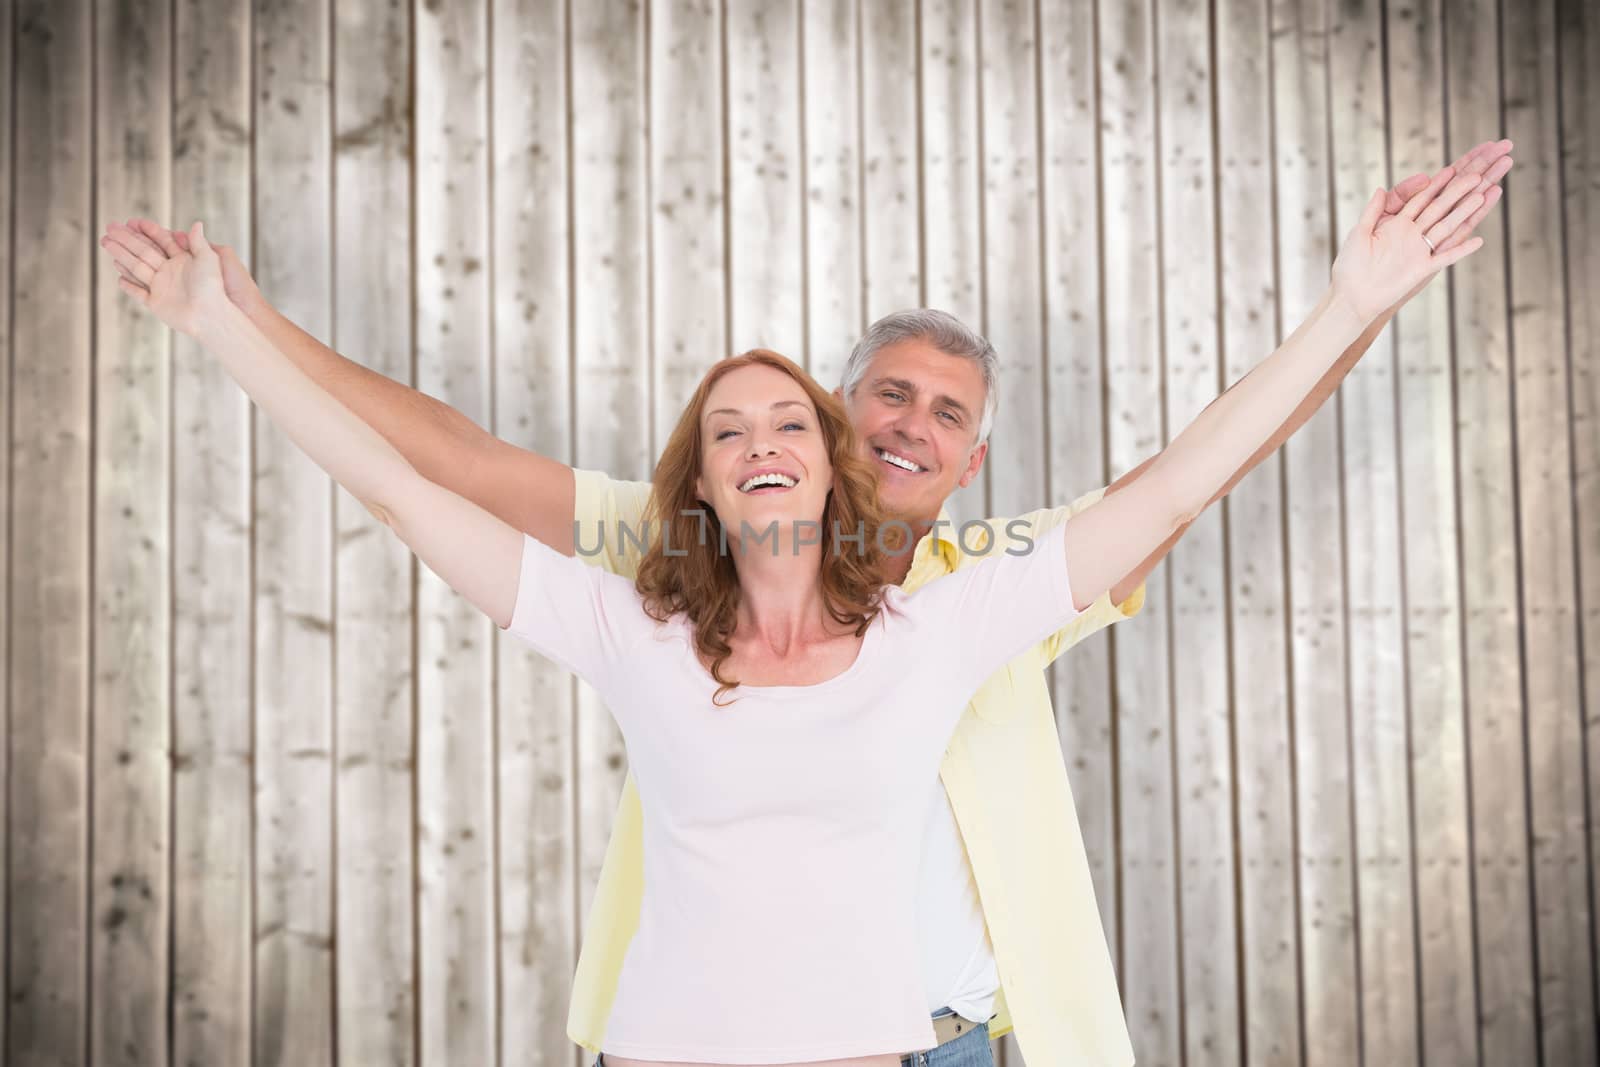 Casual couple smiling with arms raised against wooden planks background